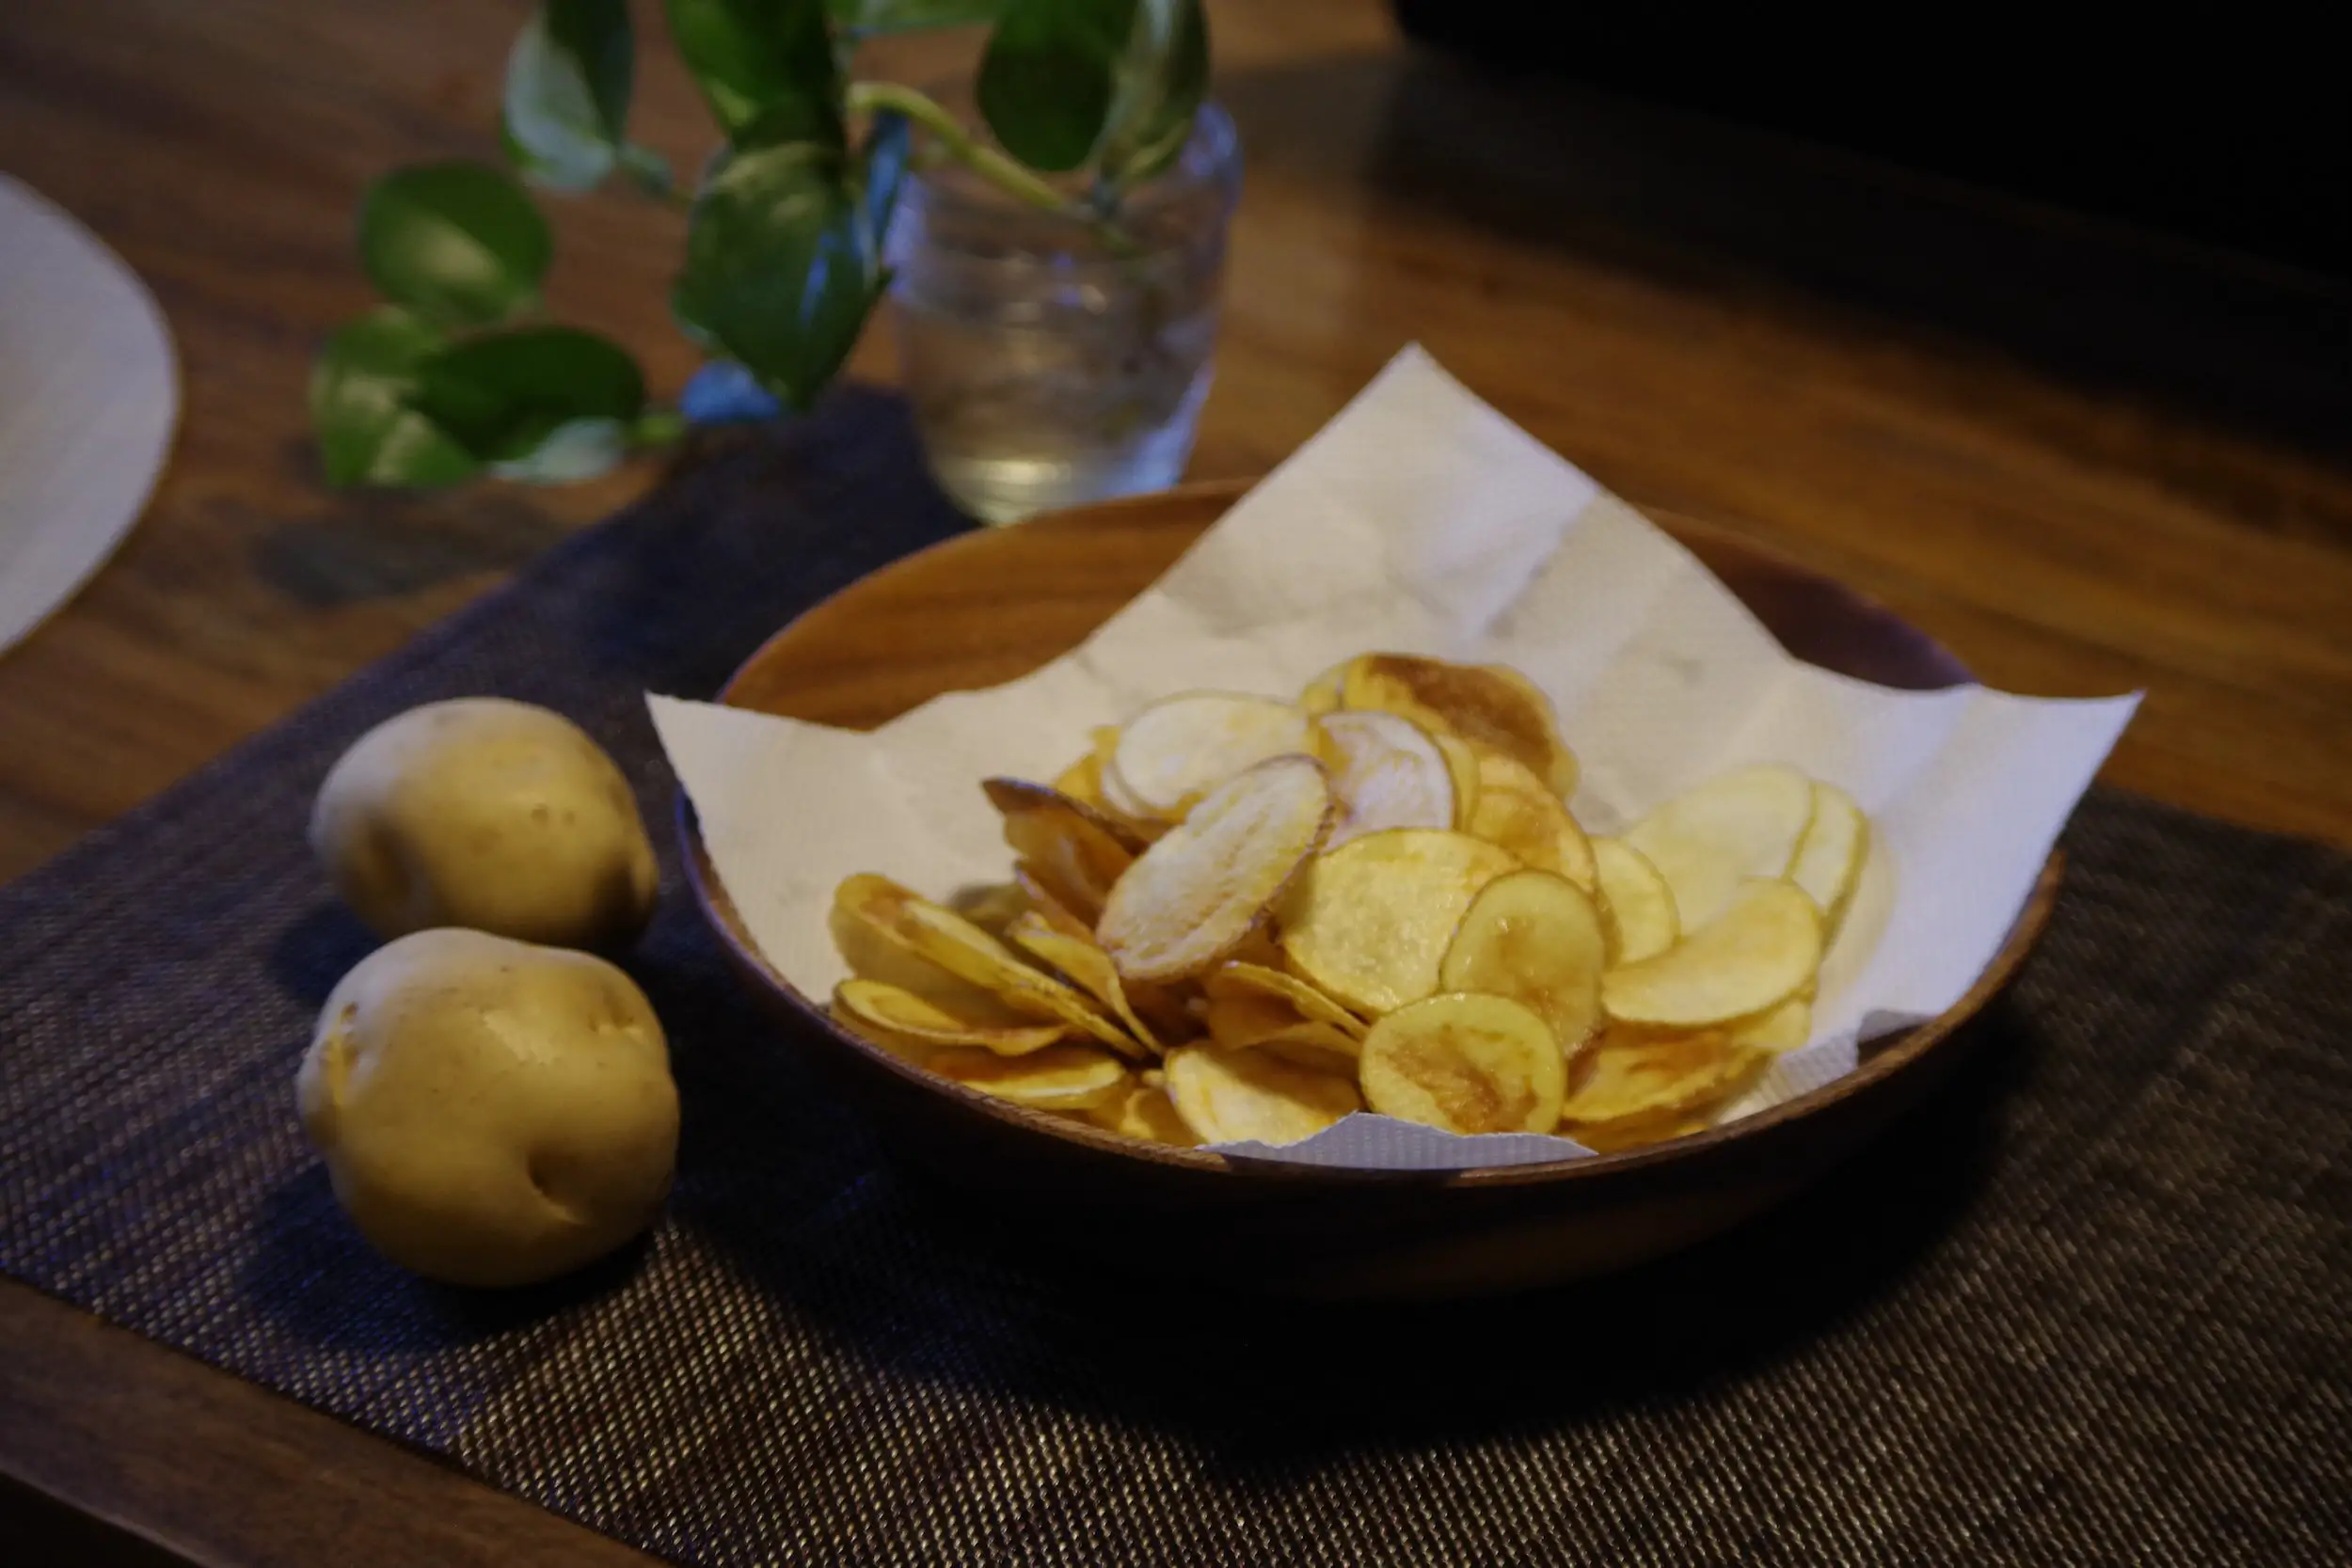 potato chips - cold appetizer for red wine tasting